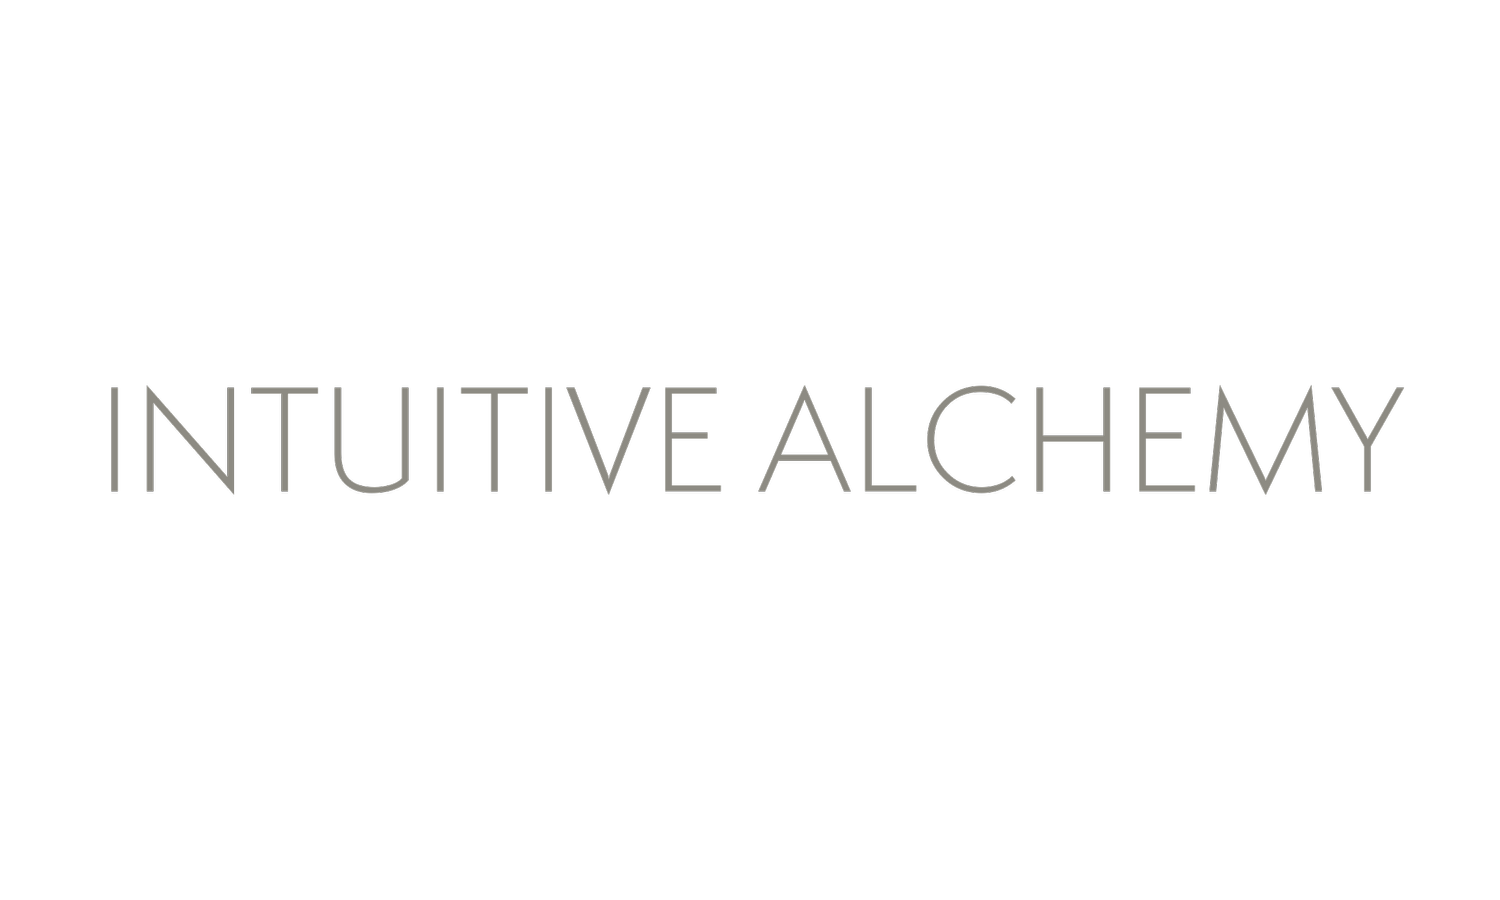 Intuitive Alchemy